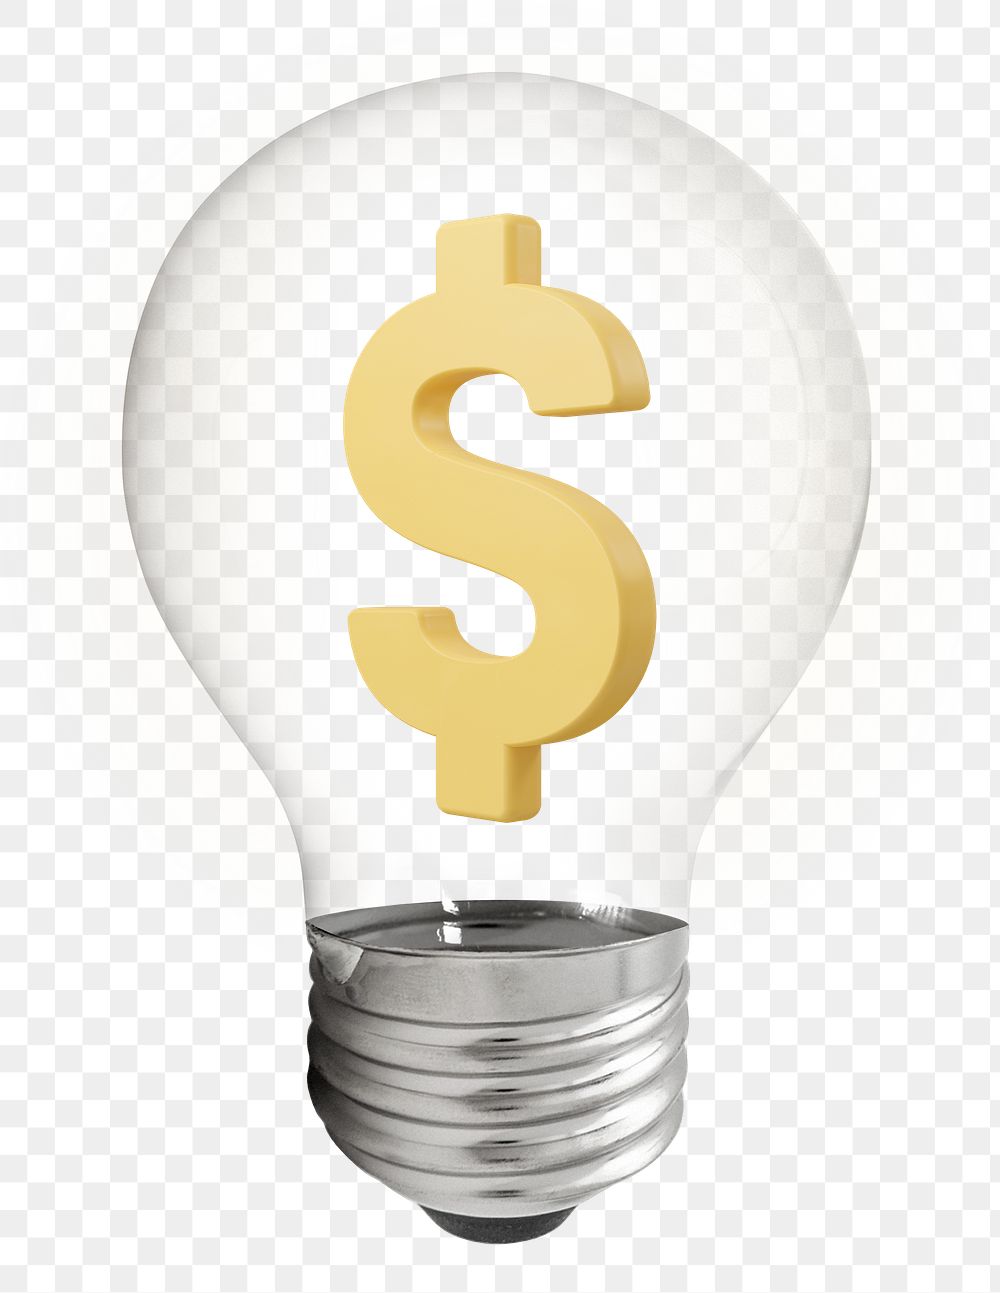 3D dollar png icon light bulb sticker, currency sign graphic on transparent background